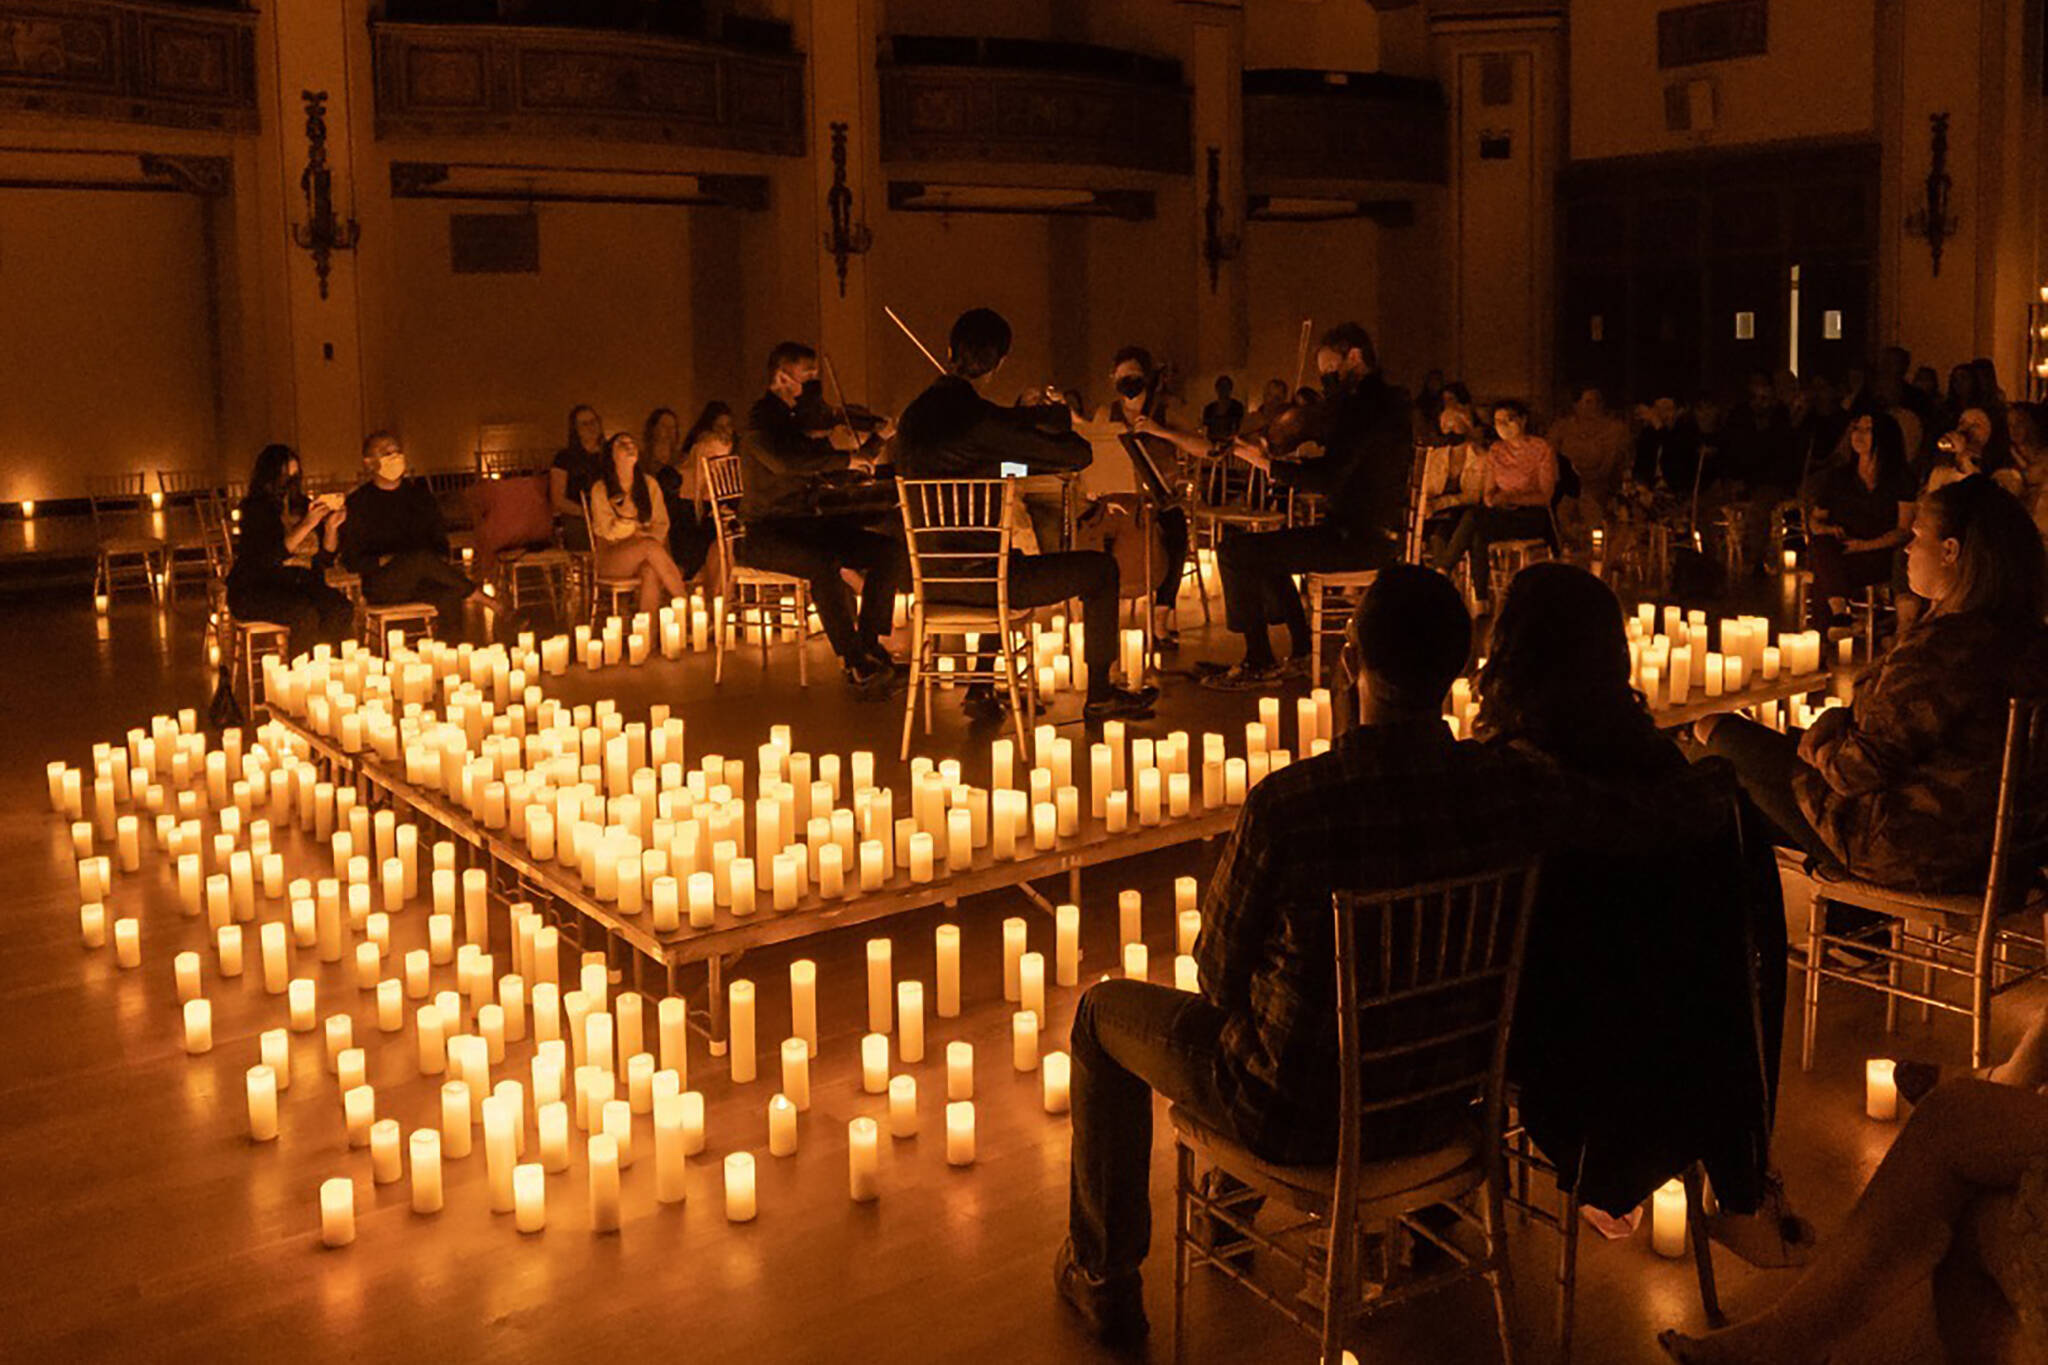 Candlelight concert series are coming to Toronto as part of global tour